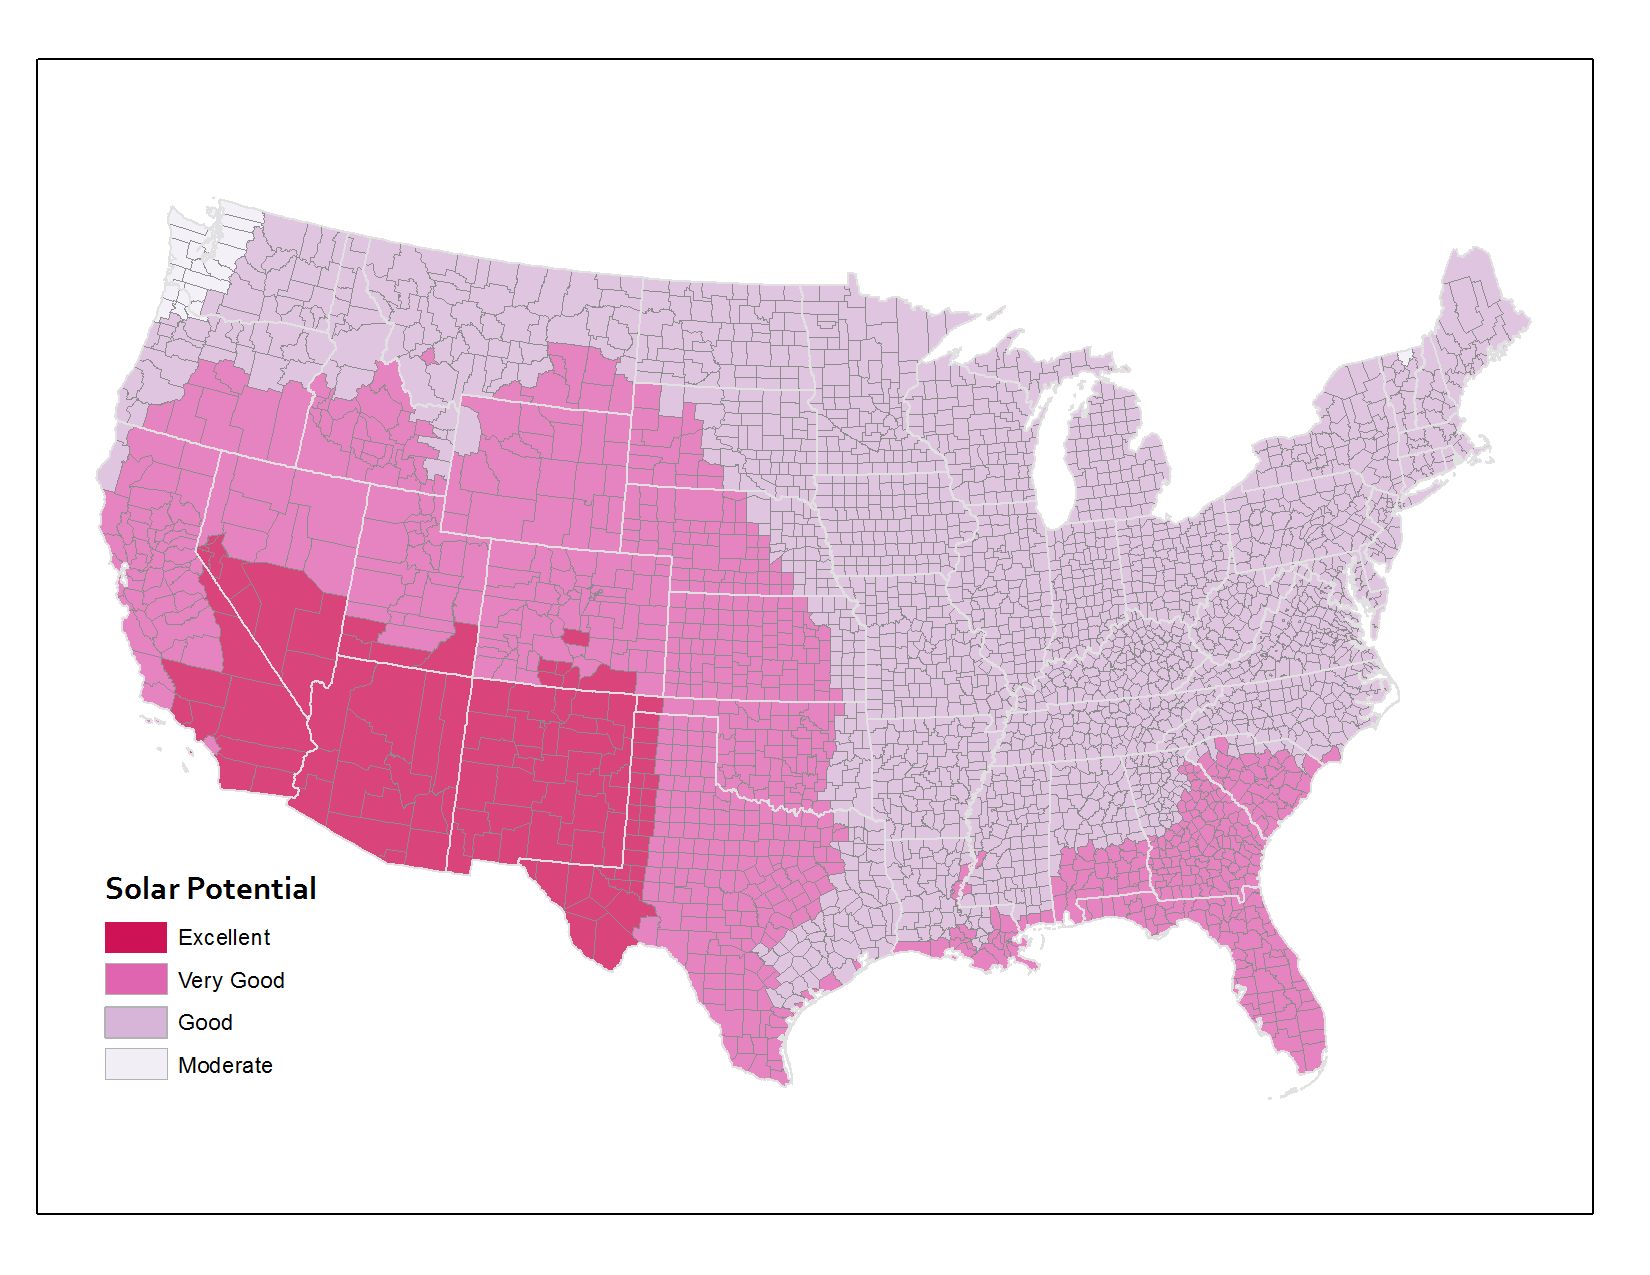 map of average annual solar potential by county. Shows more areas with higher potential than the state map does